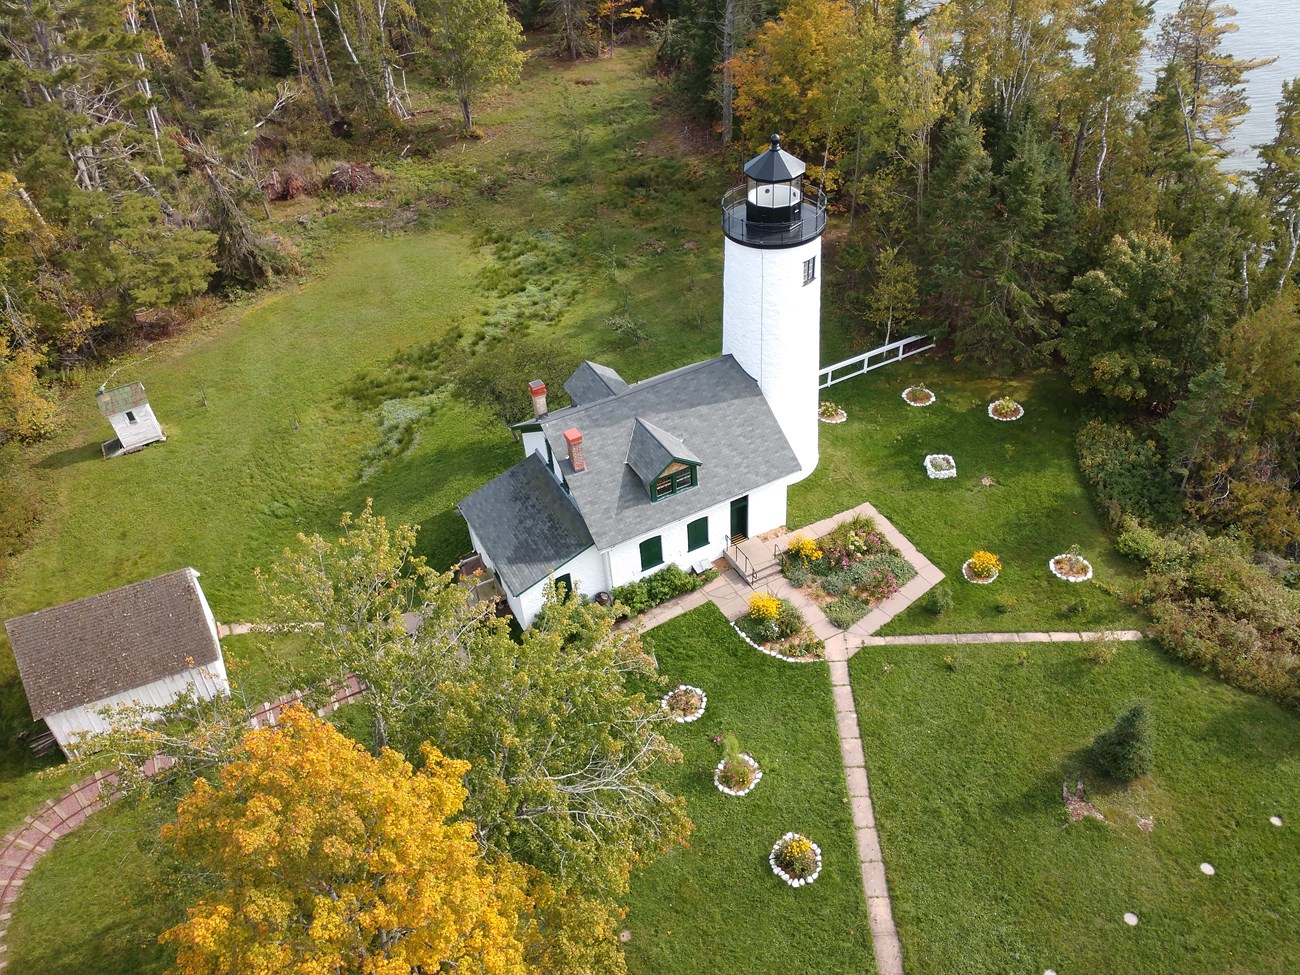 Overhead view of the old Michigan Lighthouse landscape, with tram tracks leading in from the left, walkways and gardens, and a perimeter of trees